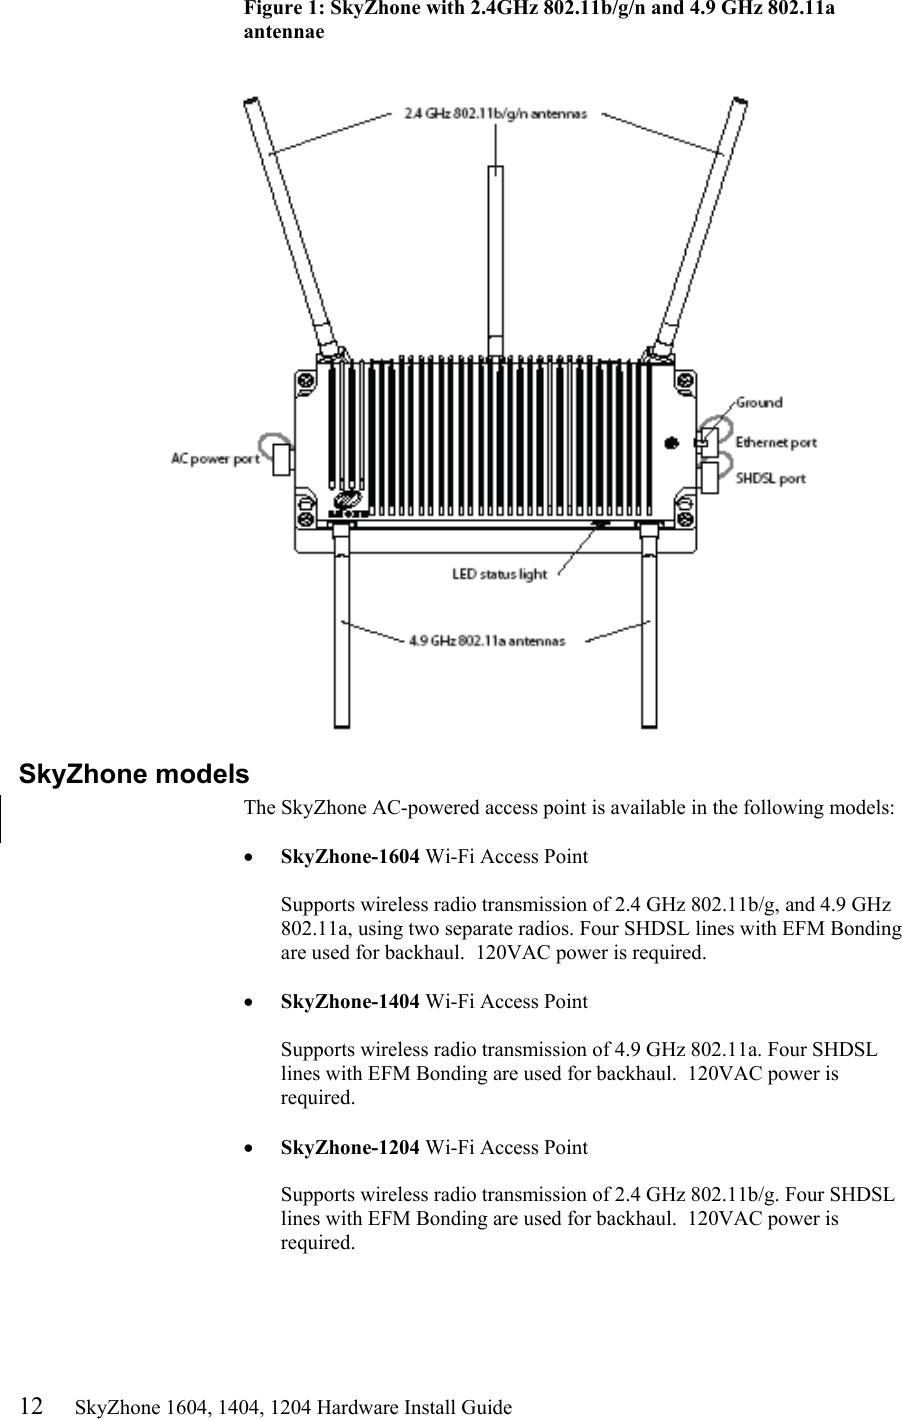 12     SkyZhone 1604, 1404, 1204 Hardware Install Guide Figure 1: SkyZhone with 2.4GHz 802.11b/g/n and 4.9 GHz 802.11a antennae    SkyZhone models The SkyZhone AC-powered access point is available in the following models:  •  SkyZhone-1604 Wi-Fi Access Point  Supports wireless radio transmission of 2.4 GHz 802.11b/g, and 4.9 GHz 802.11a, using two separate radios. Four SHDSL lines with EFM Bonding are used for backhaul.  120VAC power is required.  •  SkyZhone-1404 Wi-Fi Access Point  Supports wireless radio transmission of 4.9 GHz 802.11a. Four SHDSL lines with EFM Bonding are used for backhaul.  120VAC power is required.  •  SkyZhone-1204 Wi-Fi Access Point  Supports wireless radio transmission of 2.4 GHz 802.11b/g. Four SHDSL lines with EFM Bonding are used for backhaul.  120VAC power is required. 